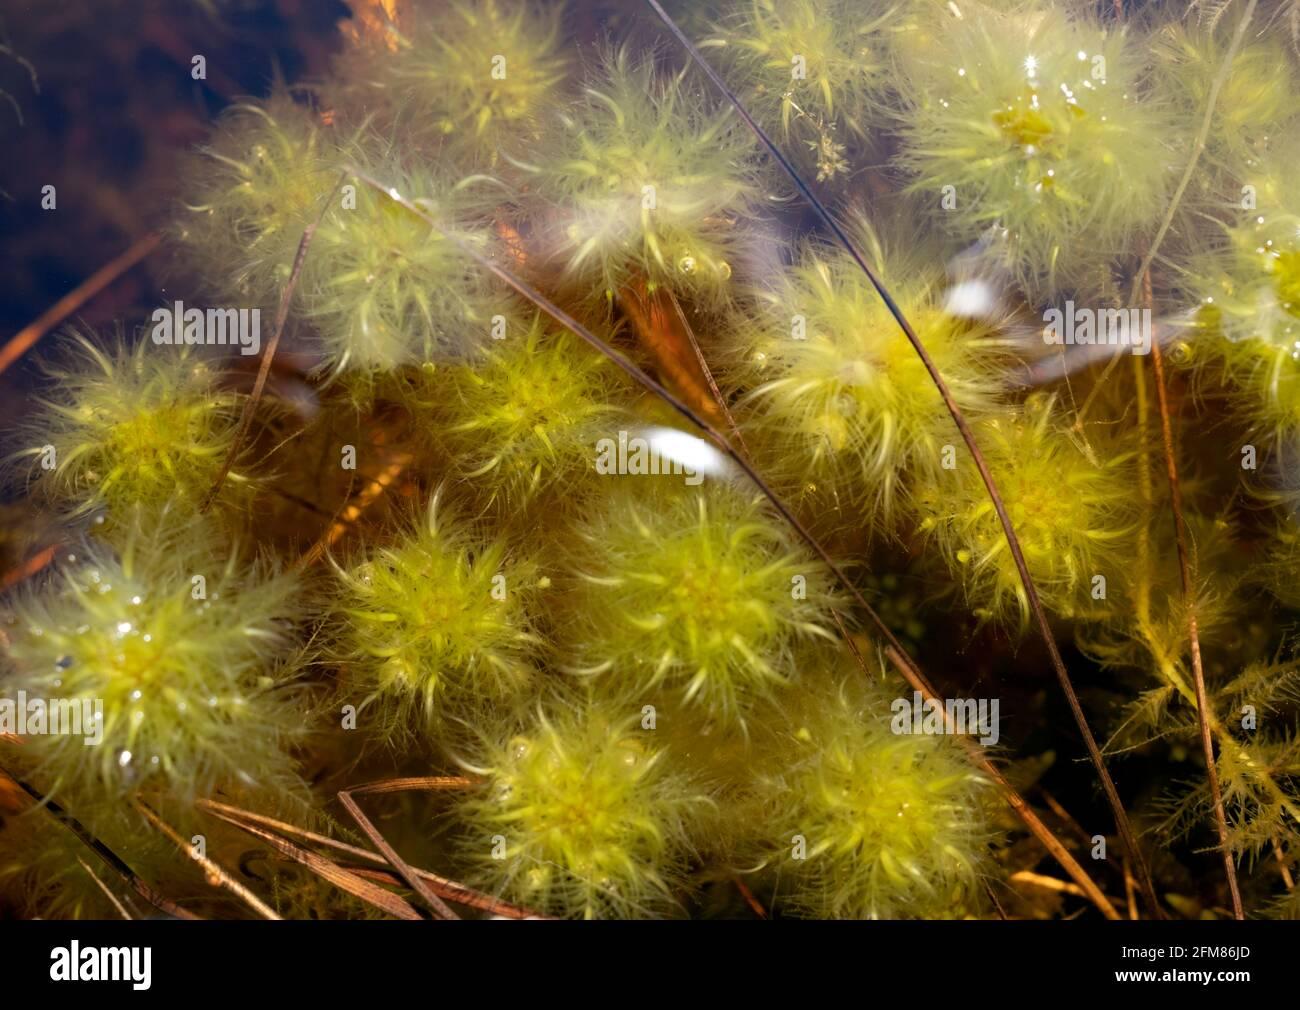 sphagnum-cuspidatum-the-feathery-bogmoss-toothed-sphagnum-or-toothed-peat-moss-underwater-image-in-kemeru-national-park-latvia-2FM86JD.jpg